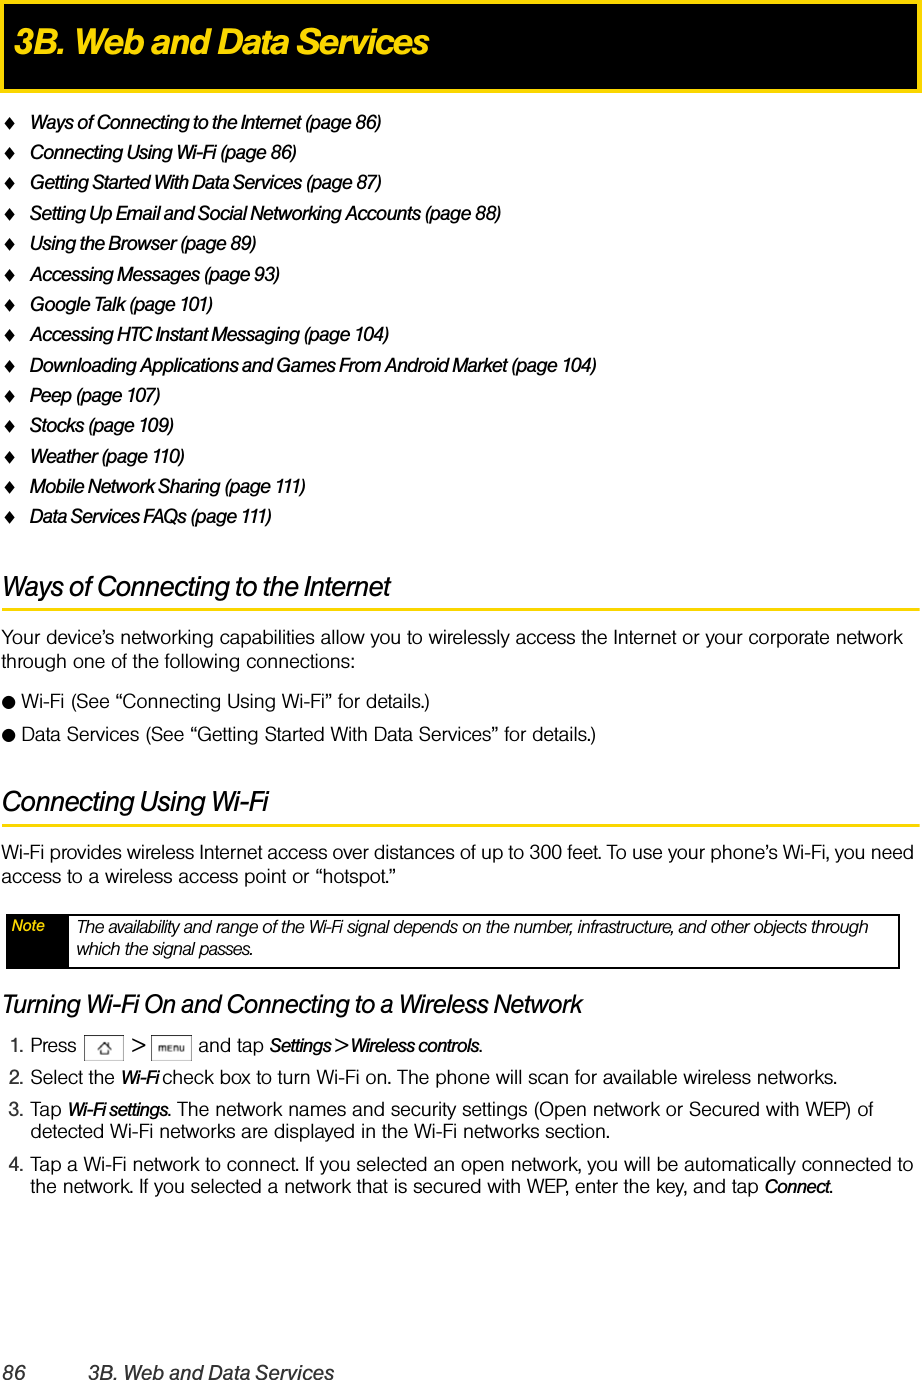 86 3B. Web and Data ServicesࡗWays of Connecting to the Internet (page 86)ࡗConnecting Using Wi-Fi (page 86)ࡗGetting Started With Data Services (page 87)ࡗSetting Up Email and Social Networking Accounts (page 88)ࡗUsing the Browser (page 89)ࡗAccessing Messages (page 93)ࡗGoogle Talk (page 101)ࡗAccessing HTC Instant Messaging (page 104)ࡗDownloading Applications and Games From Android Market (page 104)ࡗPeep (page 107)ࡗStocks (page 109)ࡗWeather (page 110)ࡗMobile Network Sharing (page 111)ࡗData Services FAQs (page 111)Ways of Connecting to the InternetYour device’s networking capabilities allow you to wirelessly access the Internet or your corporate network through one of the following connections:ⅷWi-Fi (See “Connecting Using Wi-Fi” for details.)ⅷData Services (See “Getting Started With Data Services” for details.)Connecting Using Wi-FiWi-Fi provides wireless Internet access over distances of up to 300 feet. To use your phone’s Wi-Fi, you need access to a wireless access point or “hotspot.”Turning Wi-Fi On and Connecting to a Wireless Network1. Press  &gt;  and tap Settings &gt; Wireless controls.2. Select the Wi-Fi check box to turn Wi-Fi on. The phone will scan for available wireless networks.3. Tap Wi-Fi settings. The network names and security settings (Open network or Secured with WEP) of detected Wi-Fi networks are displayed in the Wi-Fi networks section.4. Tap a Wi-Fi network to connect. If you selected an open network, you will be automatically connected to the network. If you selected a network that is secured with WEP, enter the key, and tap Connect.3B. Web and Data ServicesNote The availability and range of the Wi-Fi signal depends on the number, infrastructure, and other objects through which the signal passes.